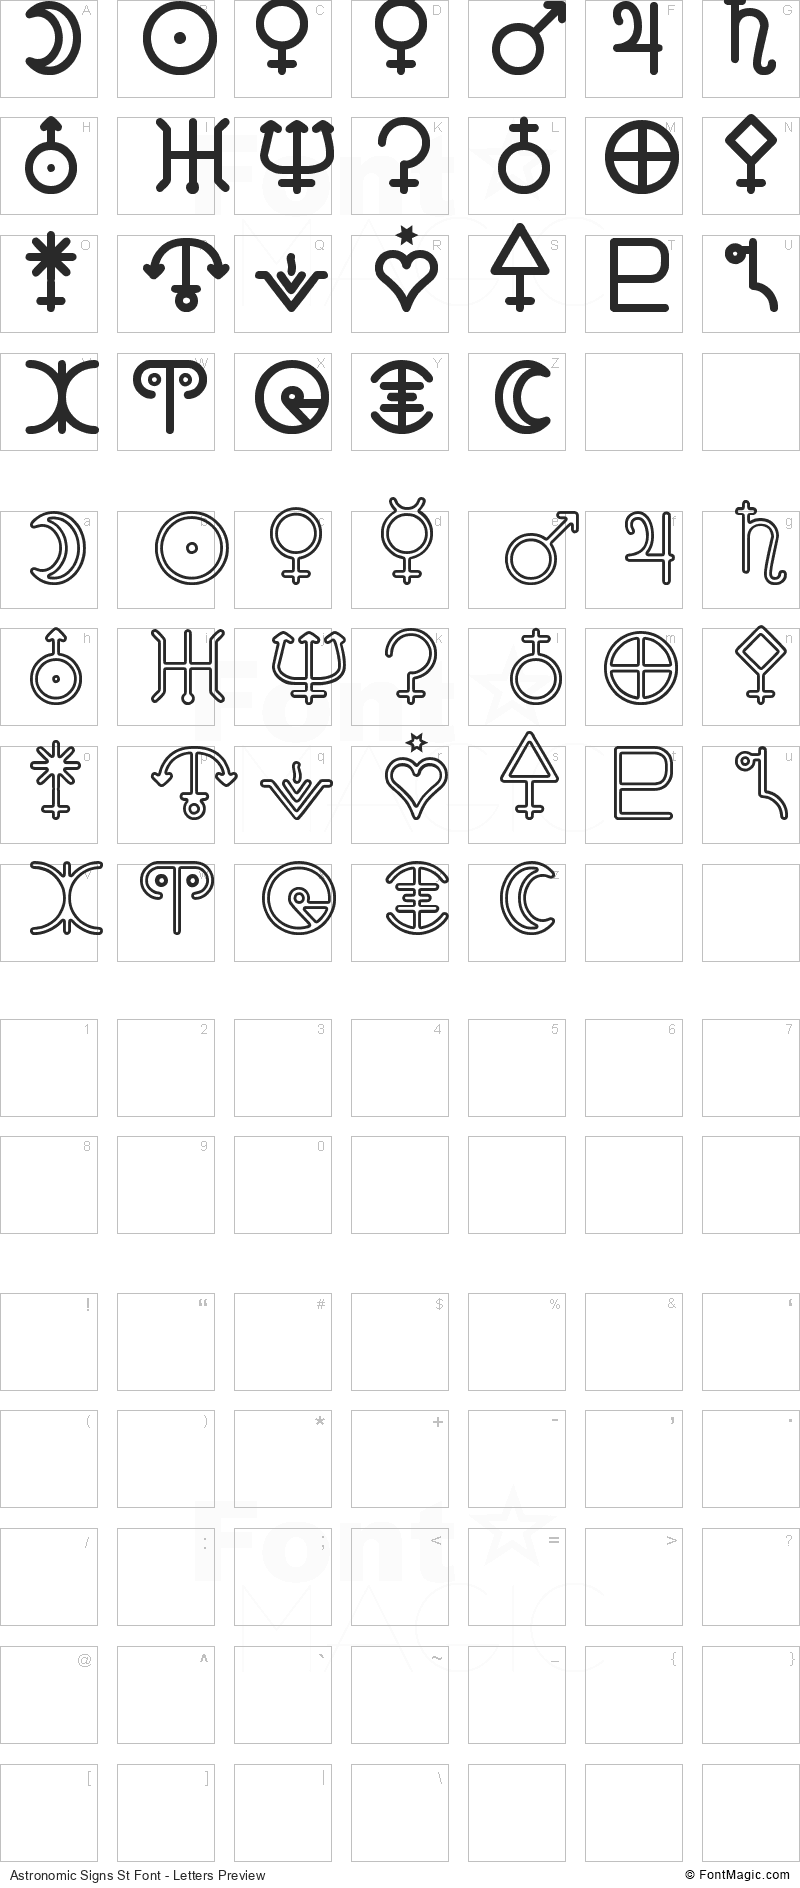 Astronomic Signs St Font - All Latters Preview Chart